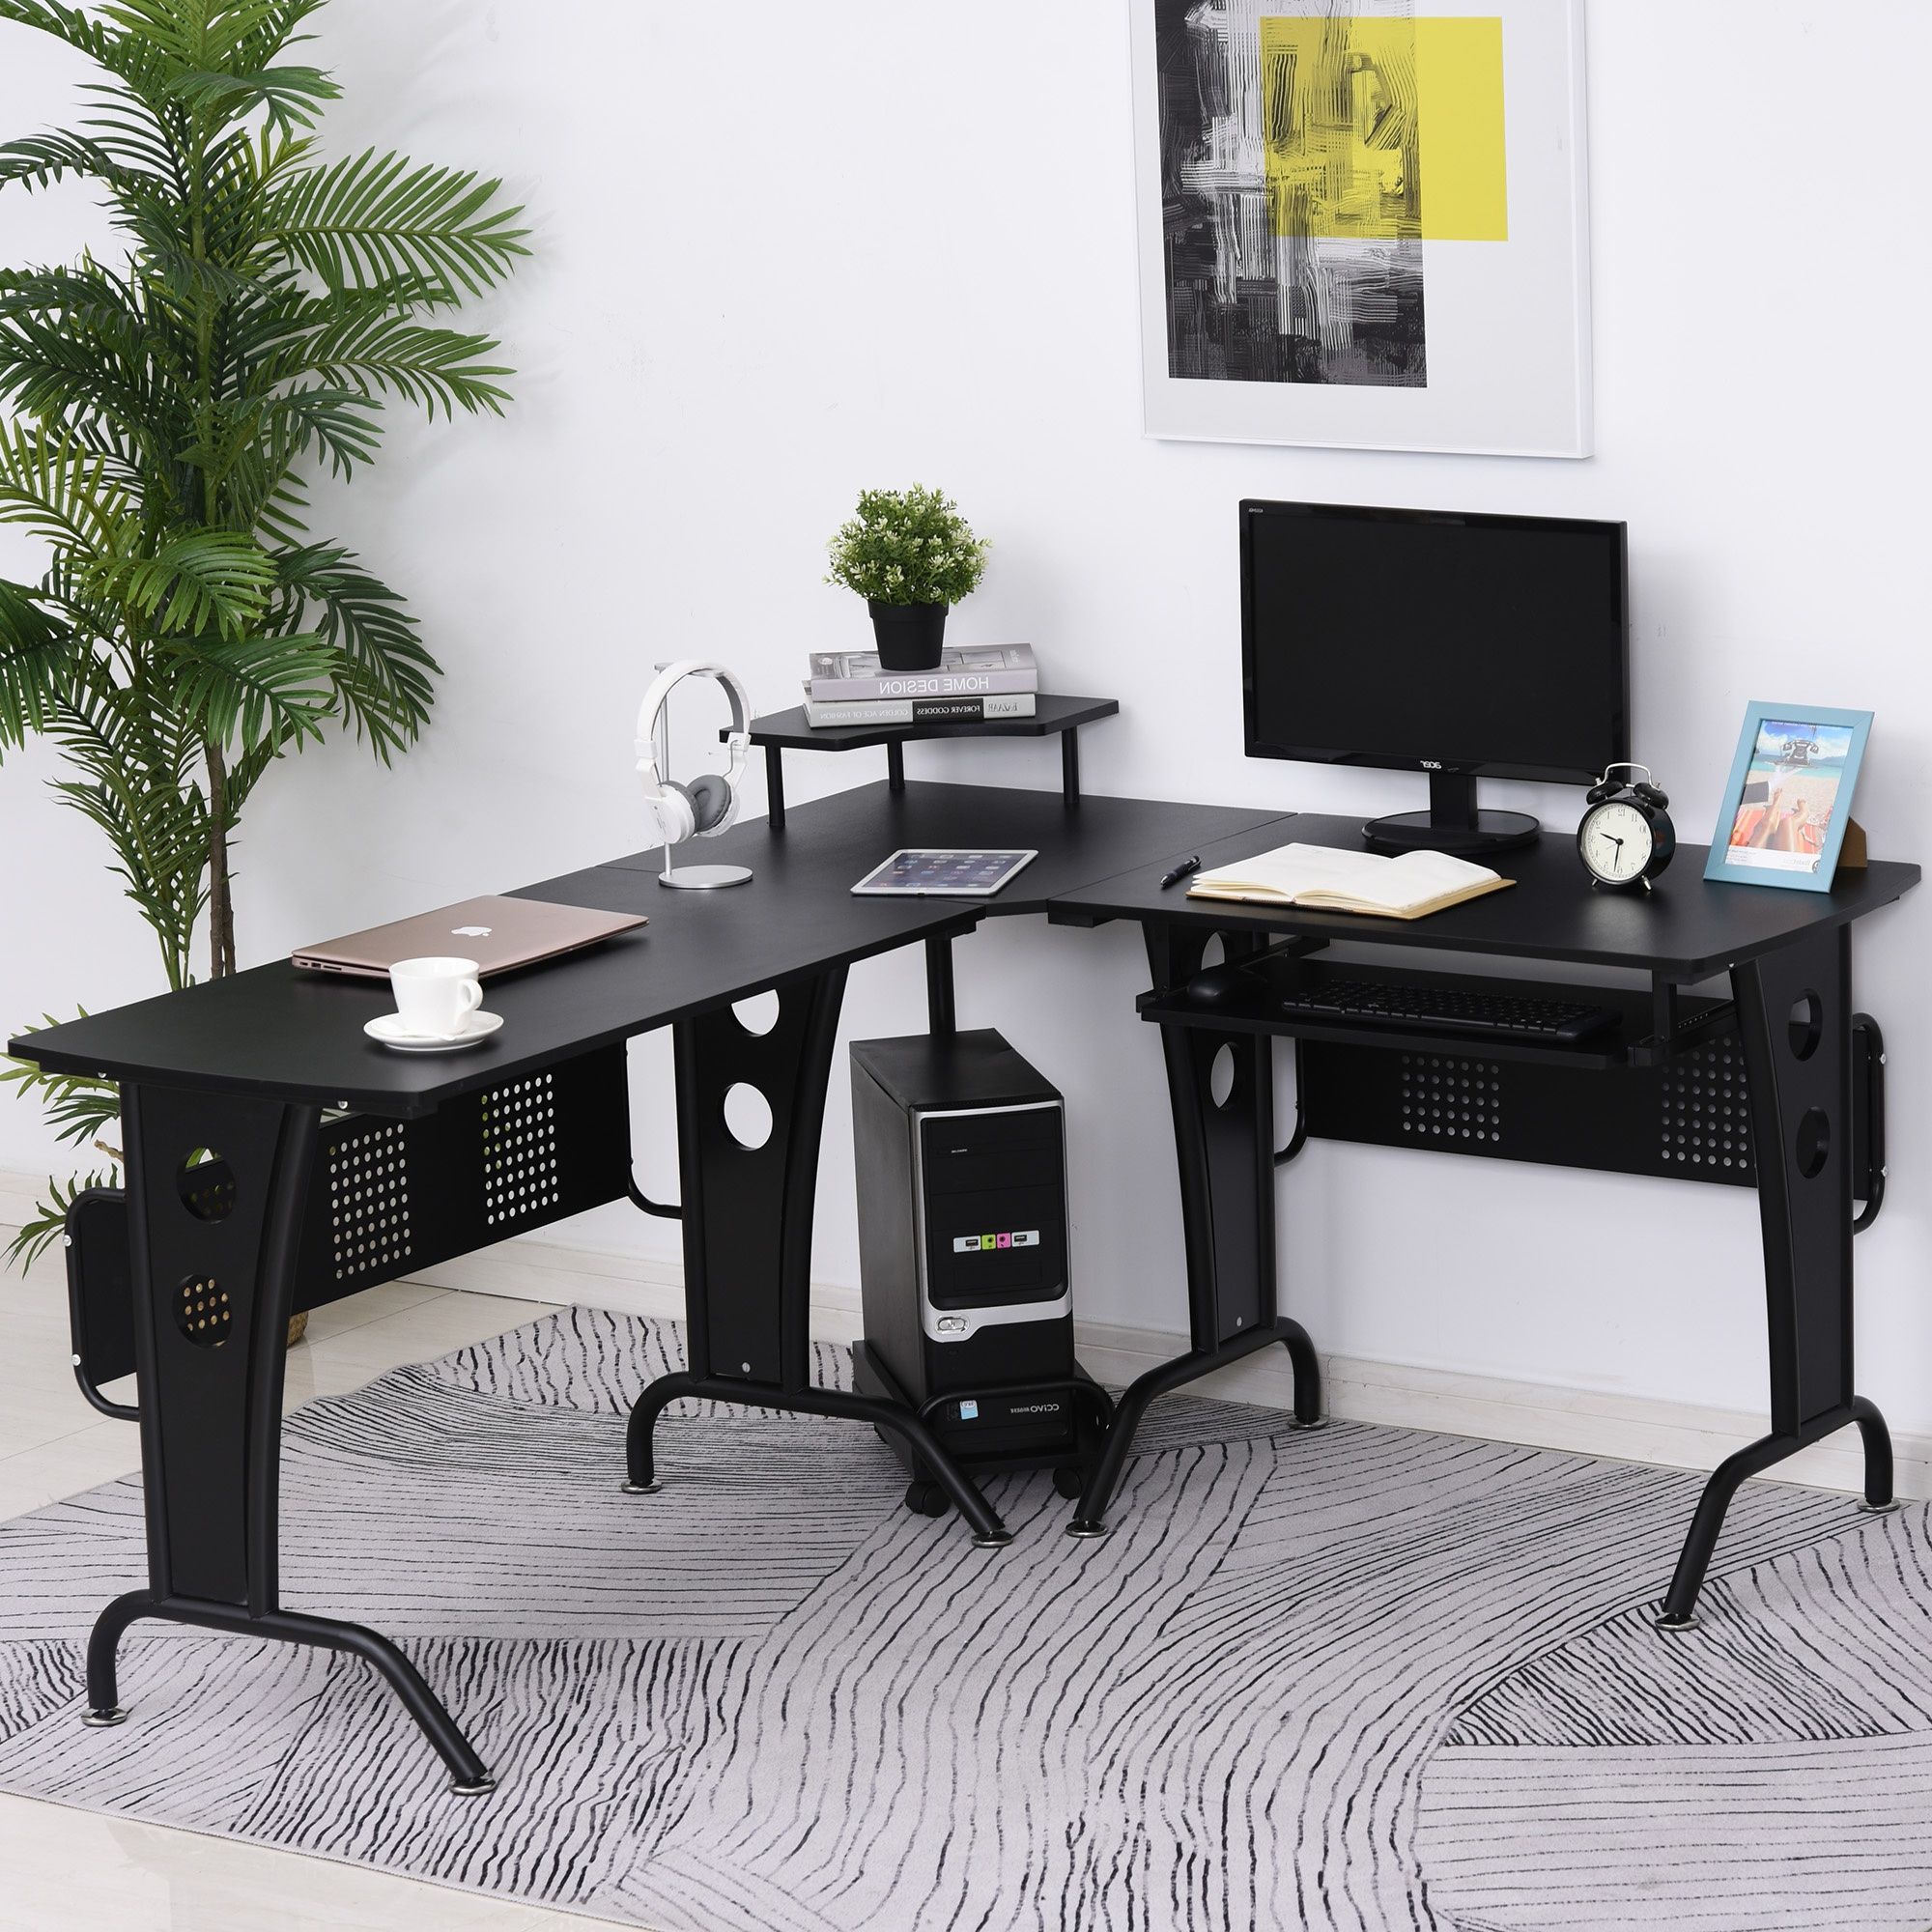 Natural Wood And White Metal Office Desks Within Trendy Homcom Steel Mdf Top L Shaped Corner Desk W/ Keyboard Tray Black (View 4 of 15)